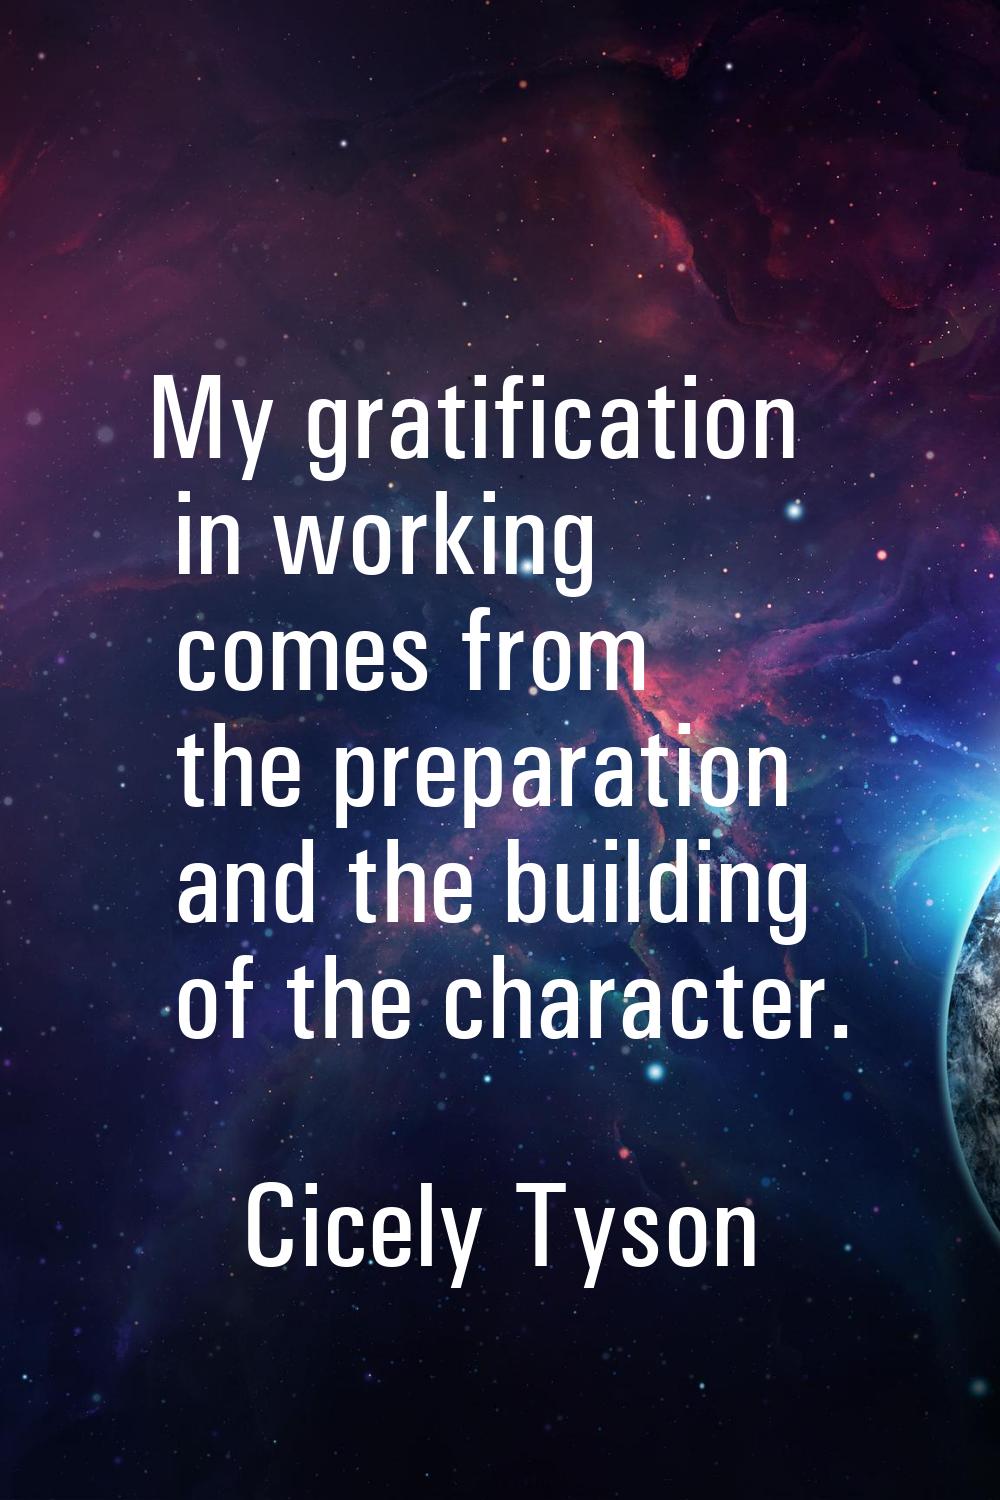 My gratification in working comes from the preparation and the building of the character.